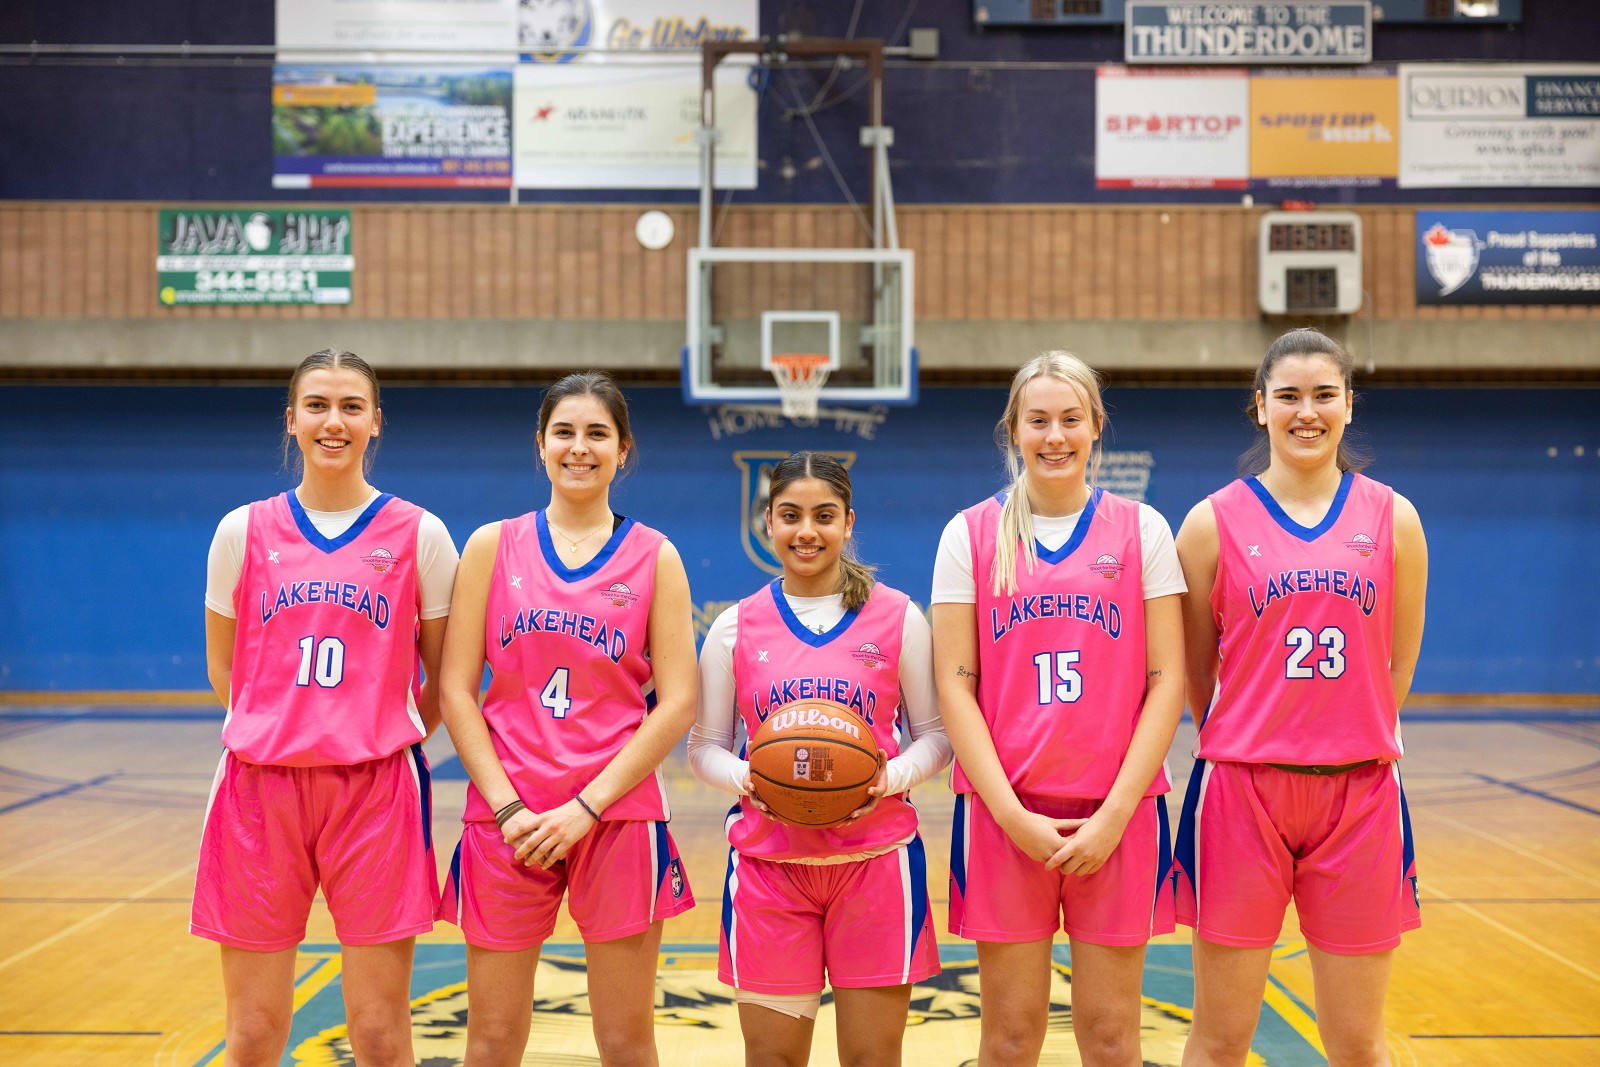 Lakehead University Athletes Support Cancer and Cardiac Care in the Community